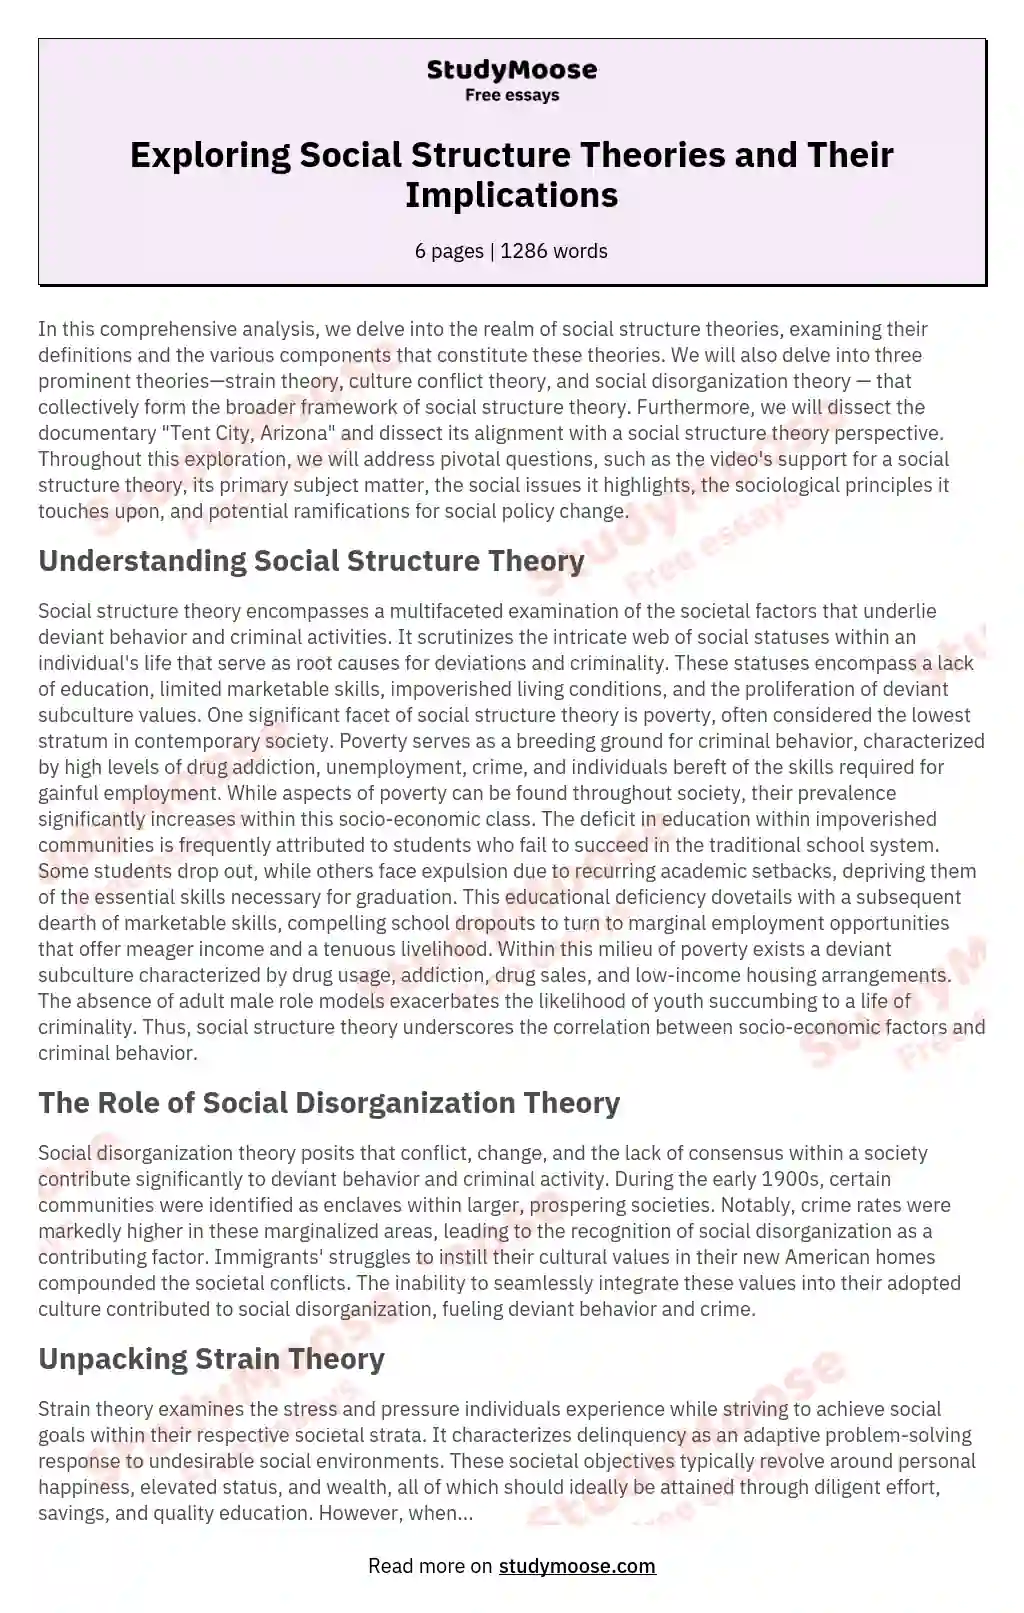 Social structure theory paper